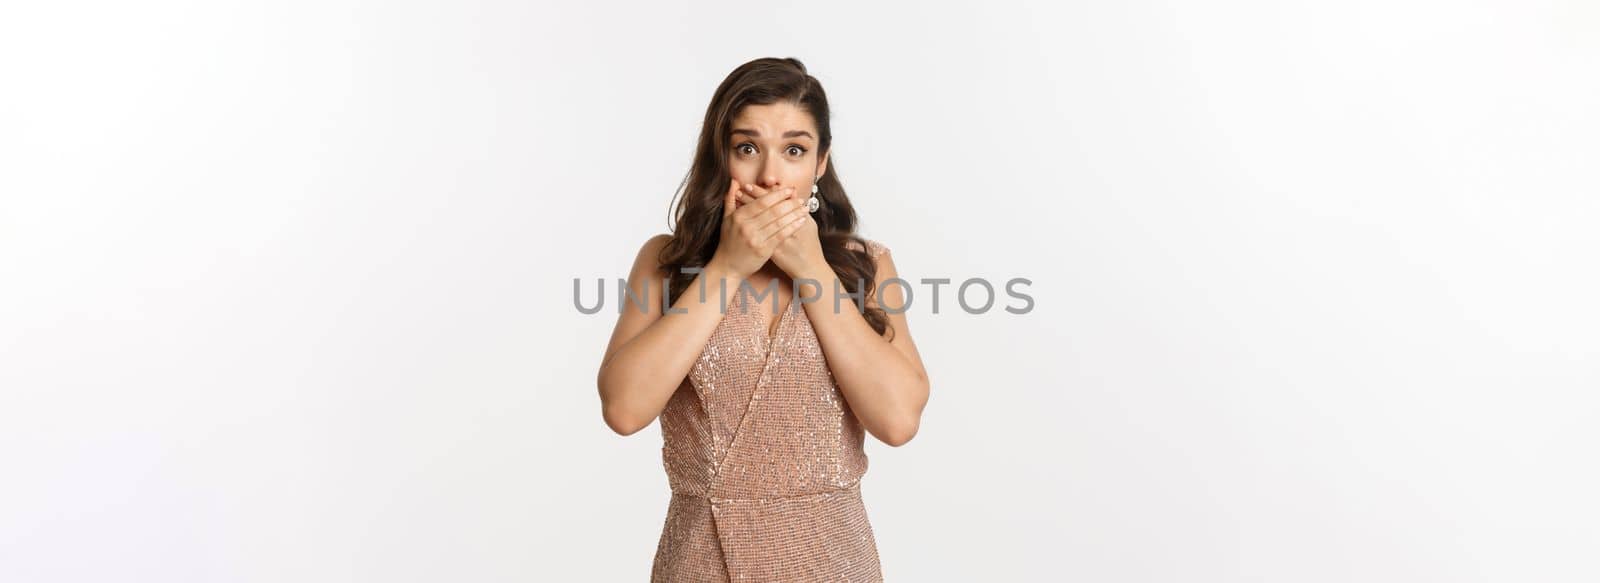 Concept of celebration, holidays and party. Startled young woman in glamour dress gasping and covering mouth with hands, looking shocked at camera, white background.